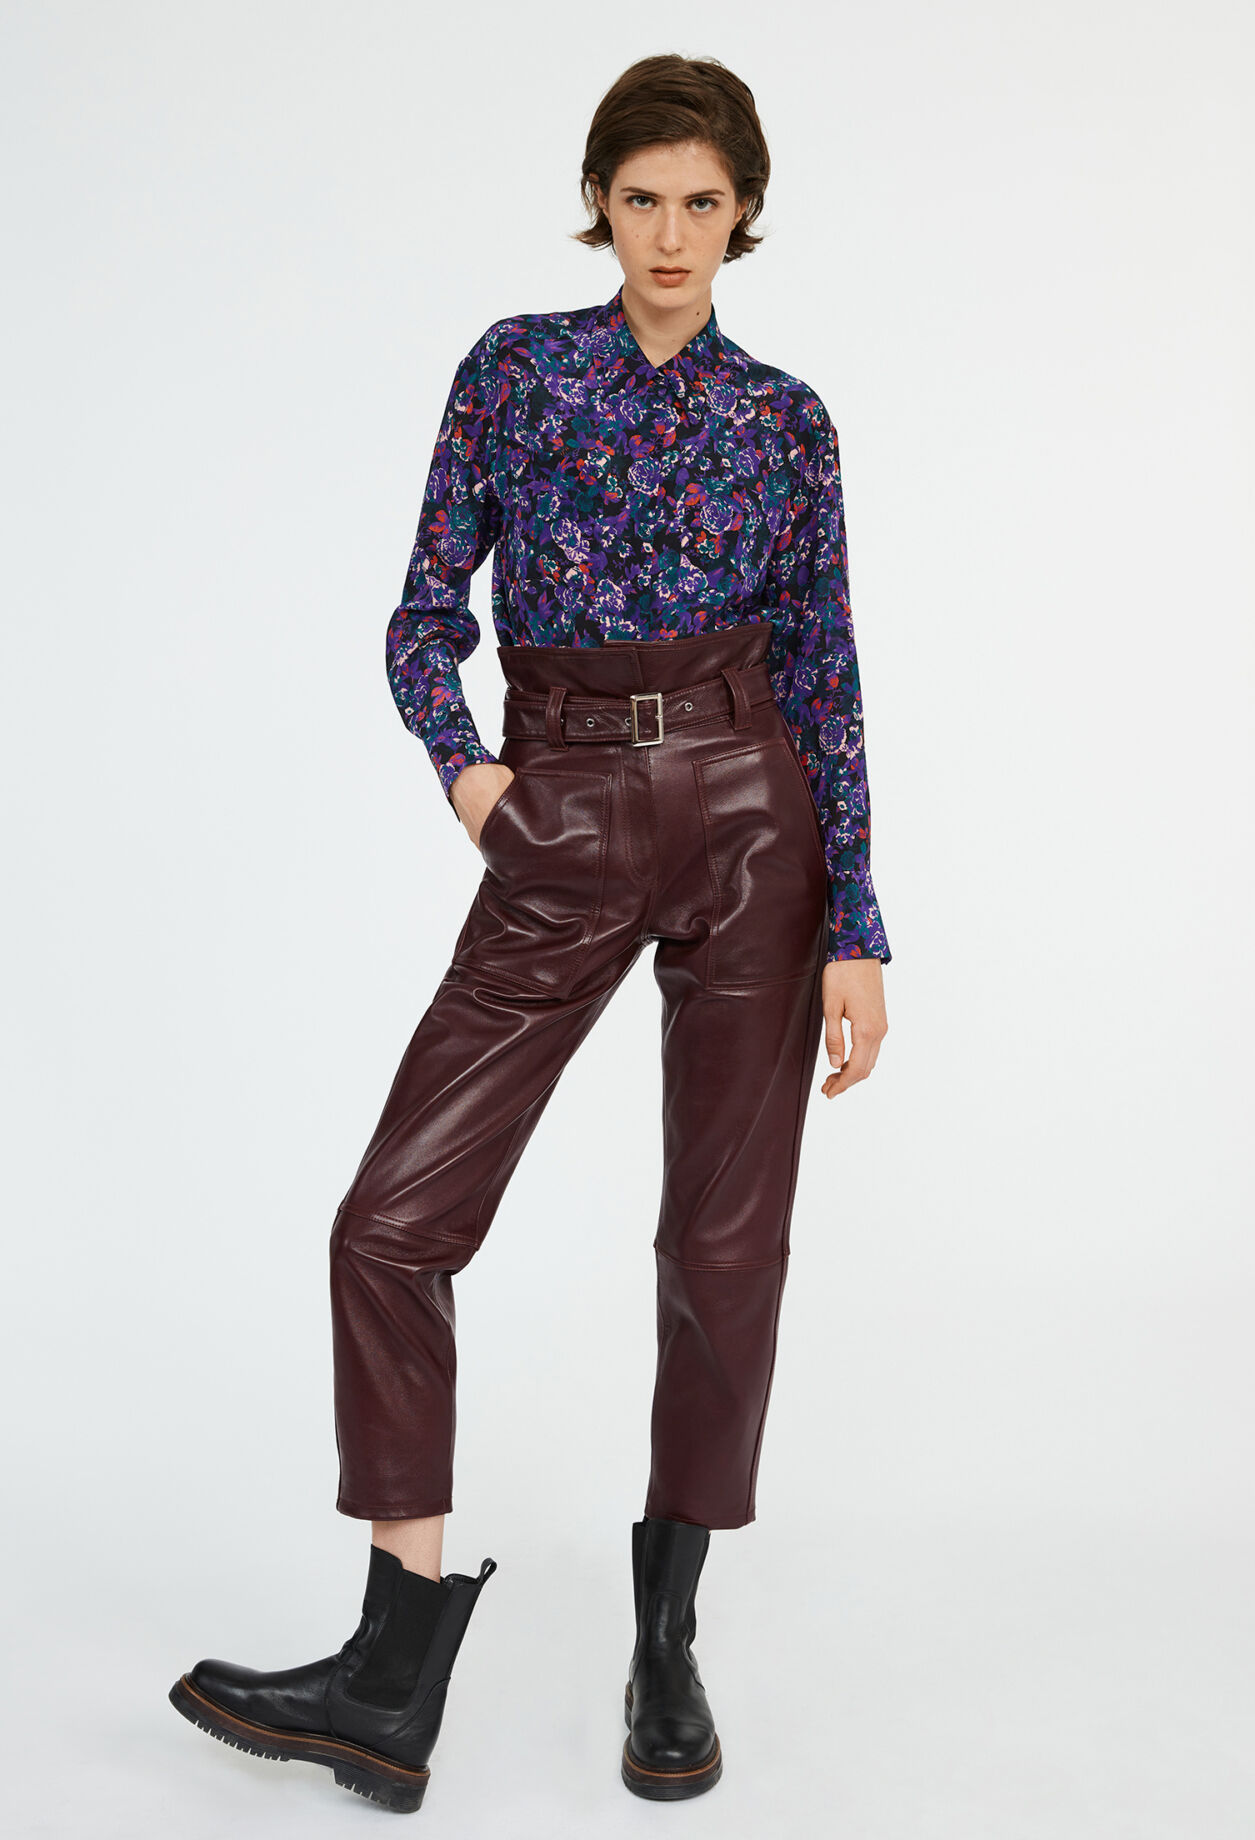 burgundy faux leather pants outfit